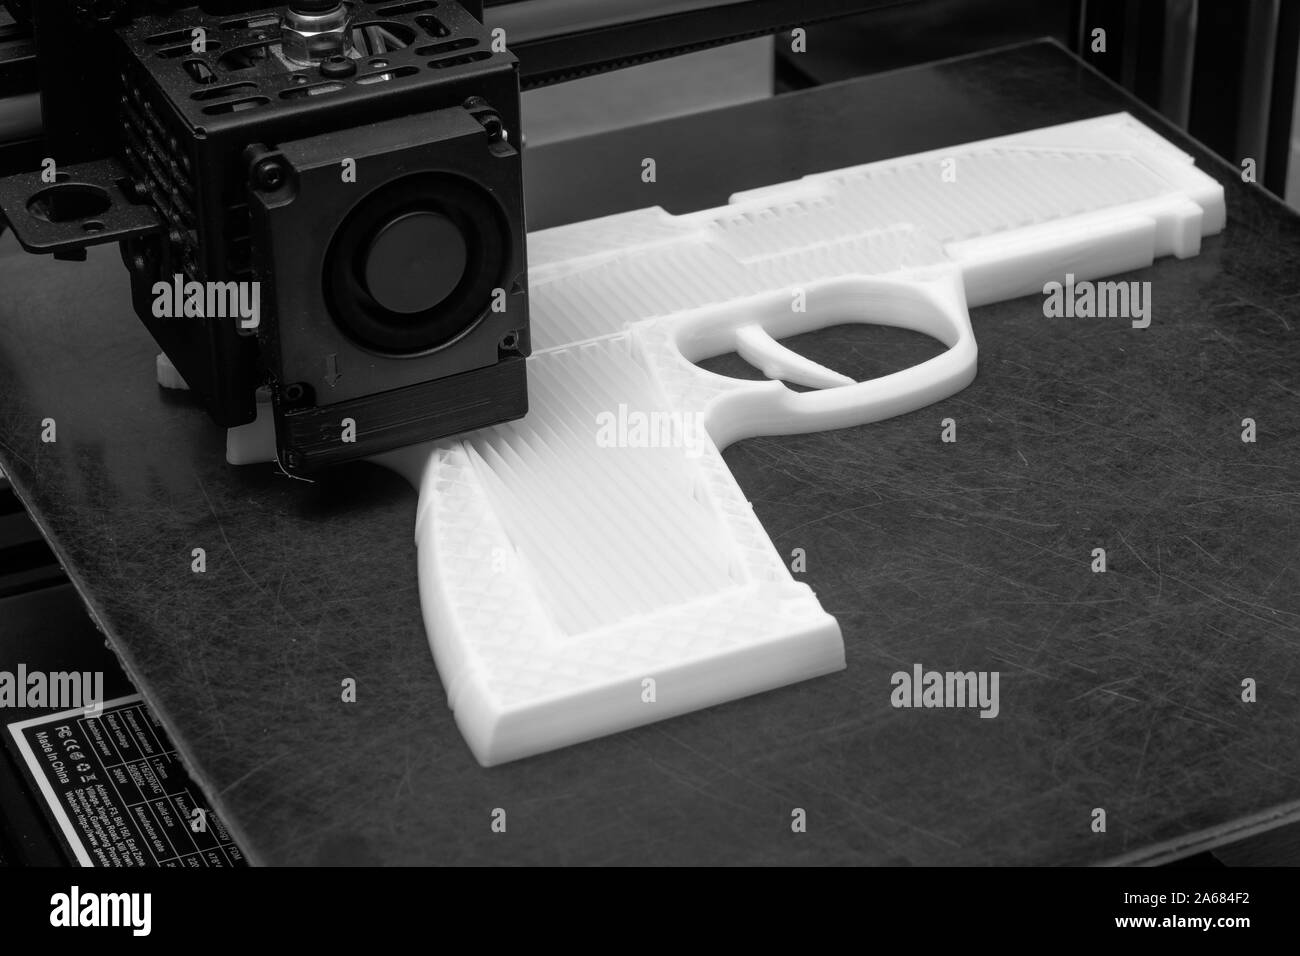 3D printed weapon used for an Assassination attempt Black and white Stock Photo